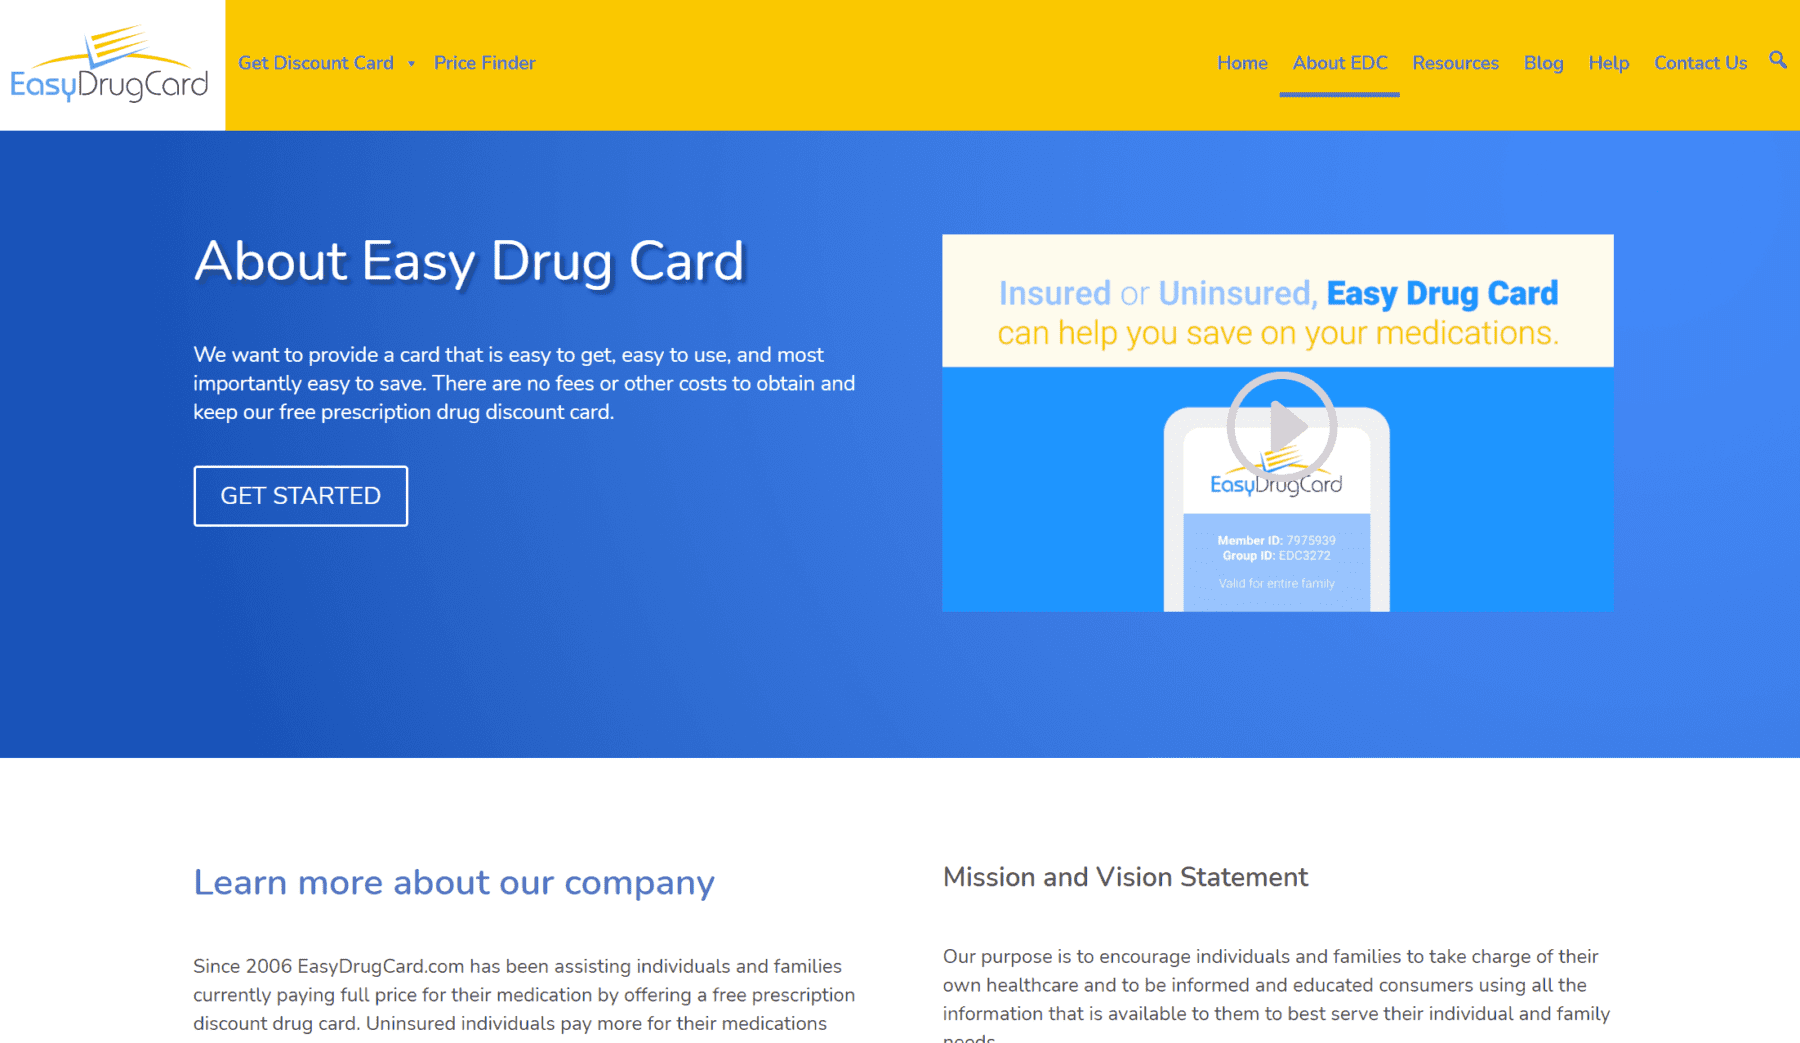 about Easy Drug Card image